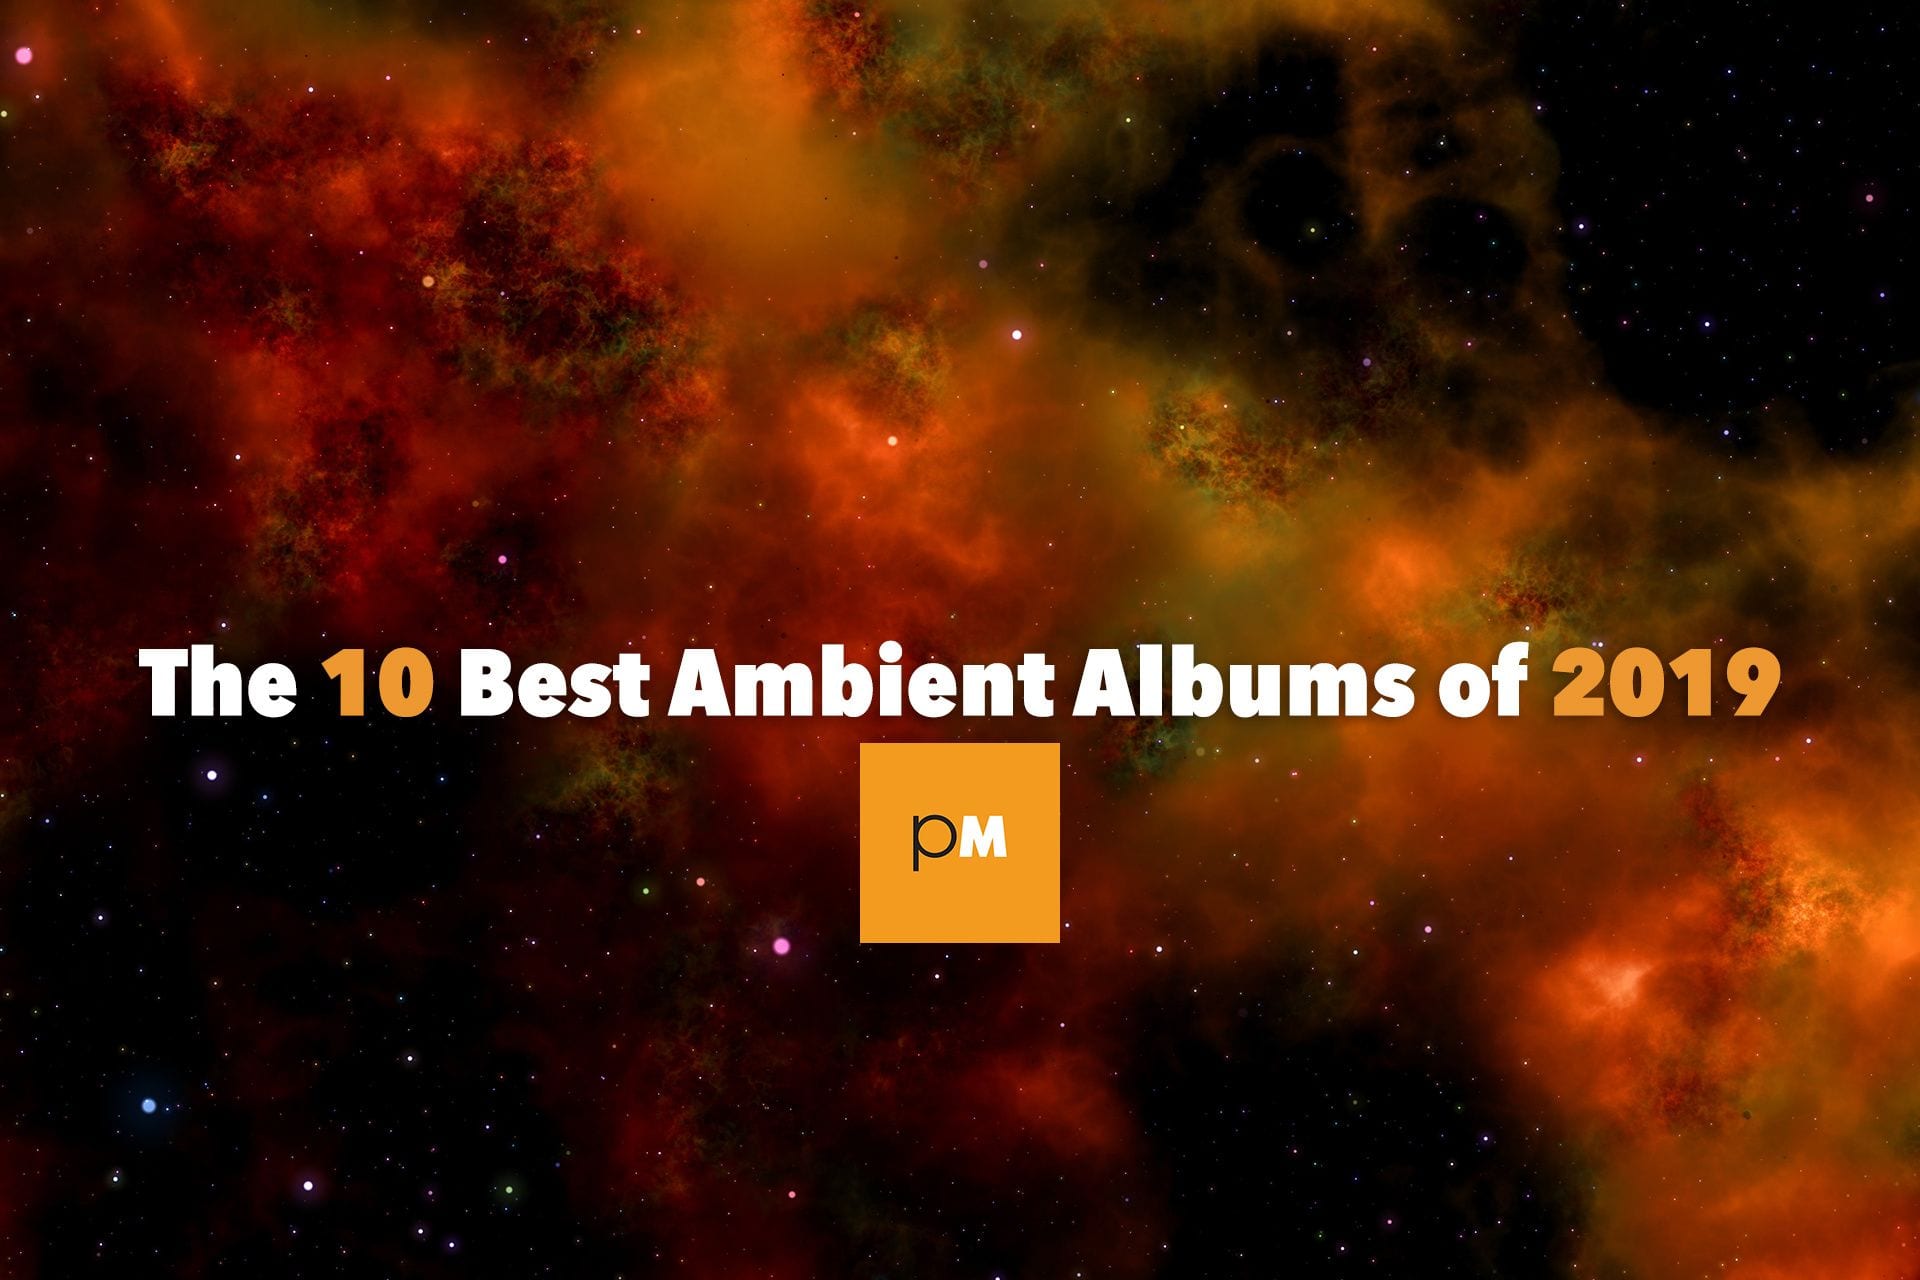 The 10 Best Ambient Albums of 2019